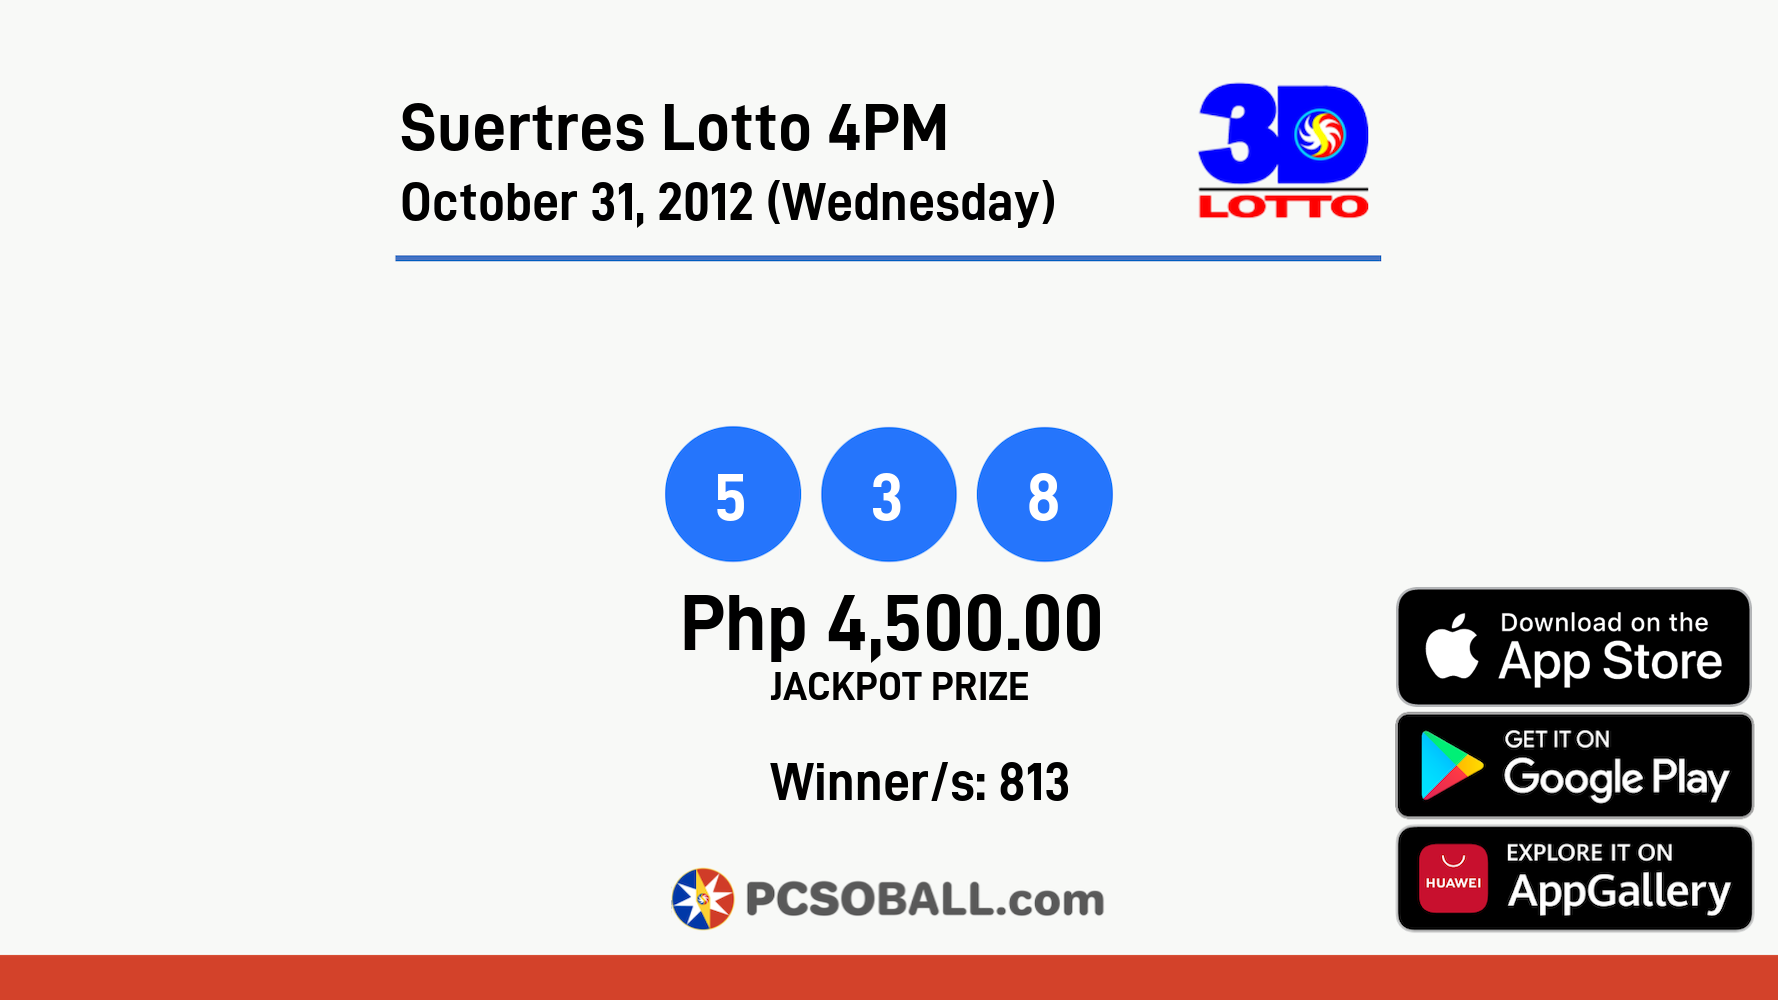 Suertres Lotto 4PM October 31, 2012 (Wednesday) Result